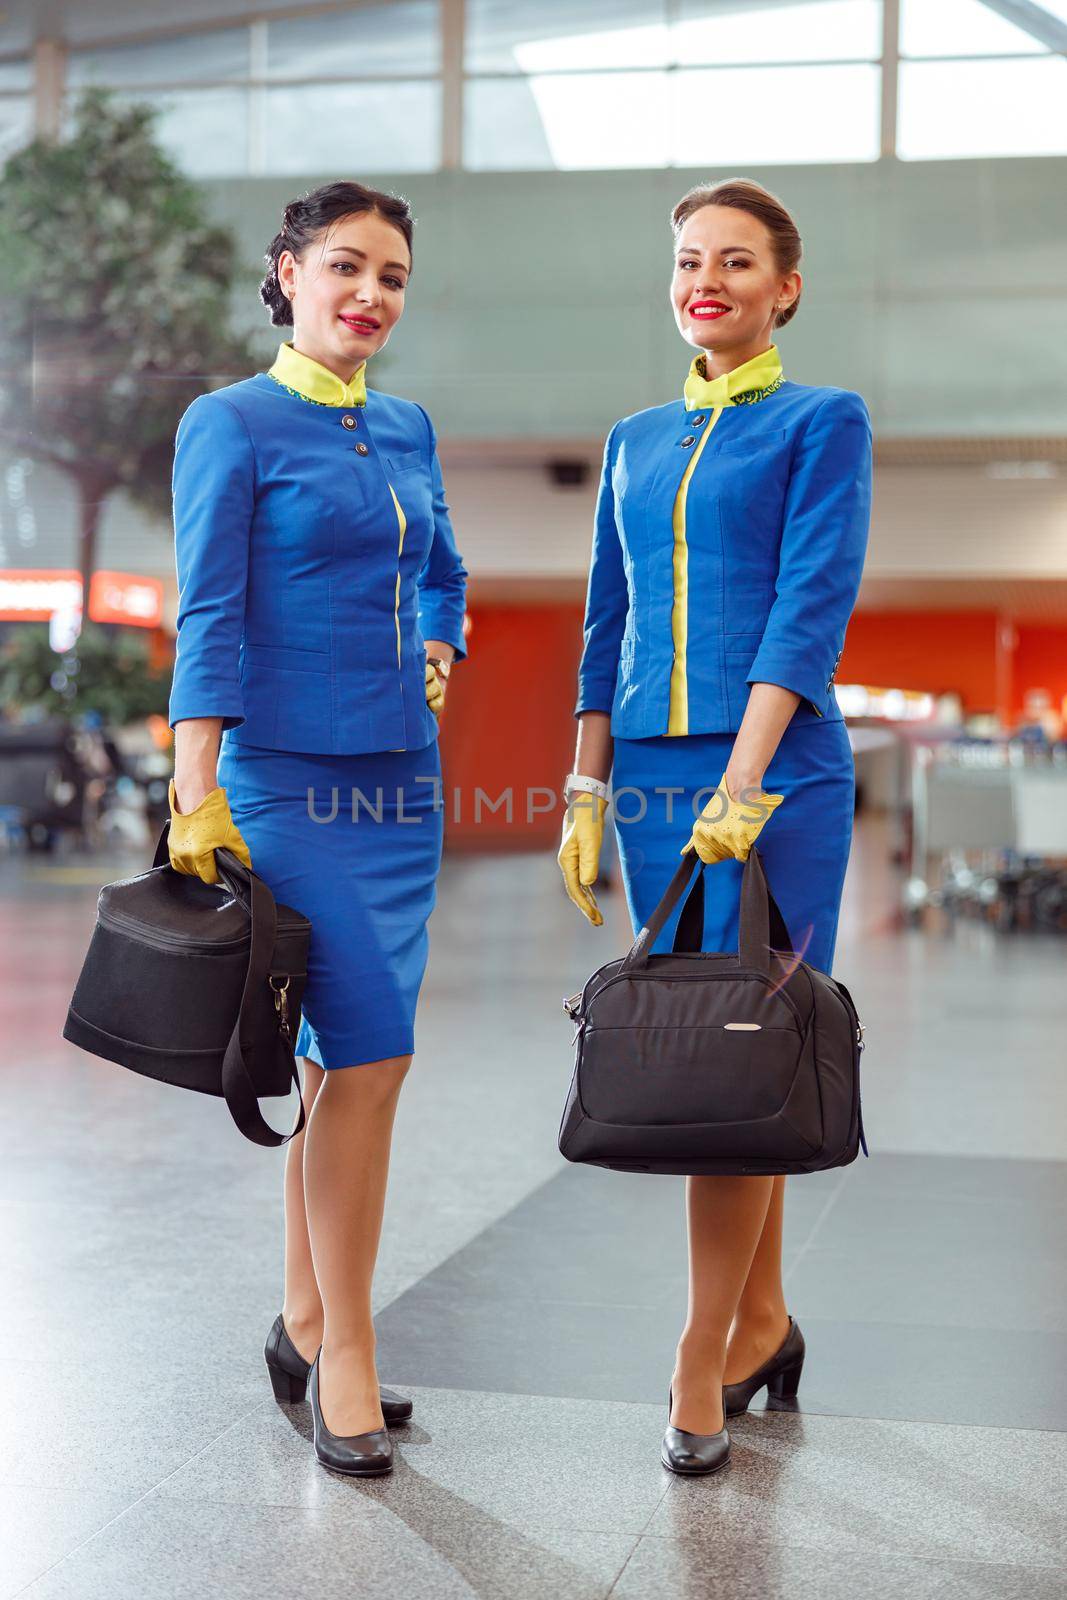 Flight attendants with travel bags standing in airport terminal by Yaroslav_astakhov